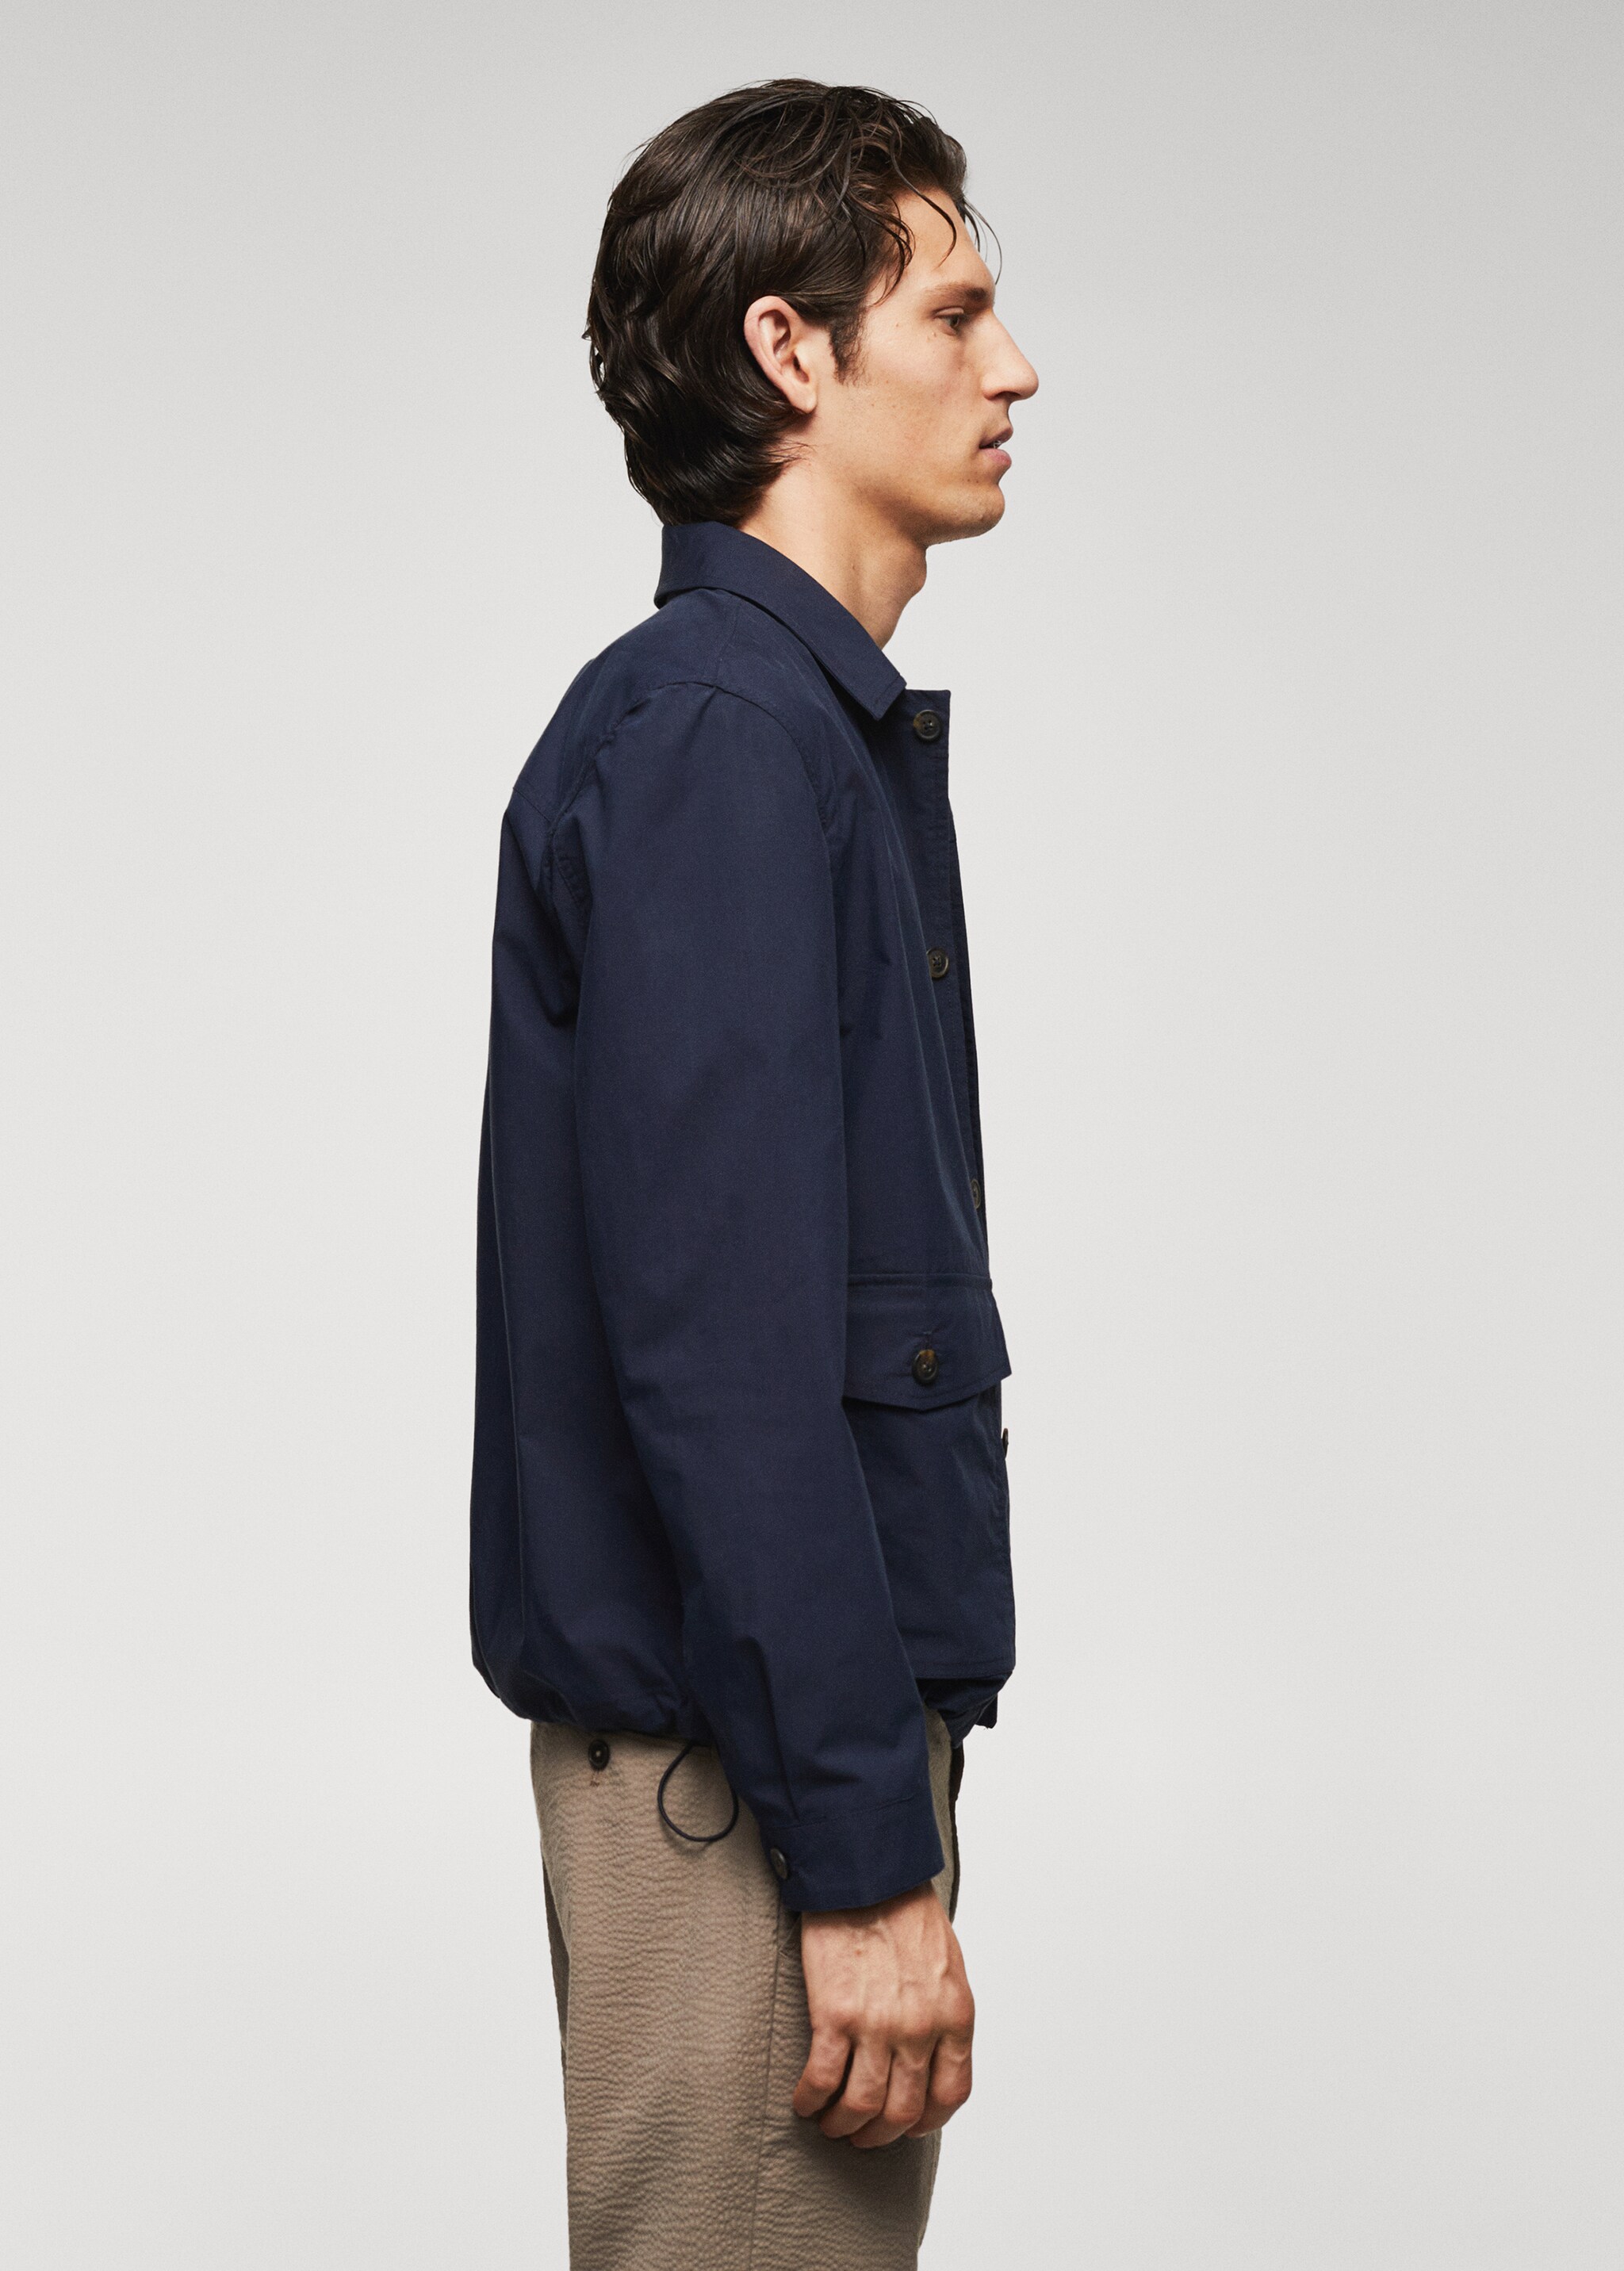 Light cotton jacket with pockets - Details of the article 2